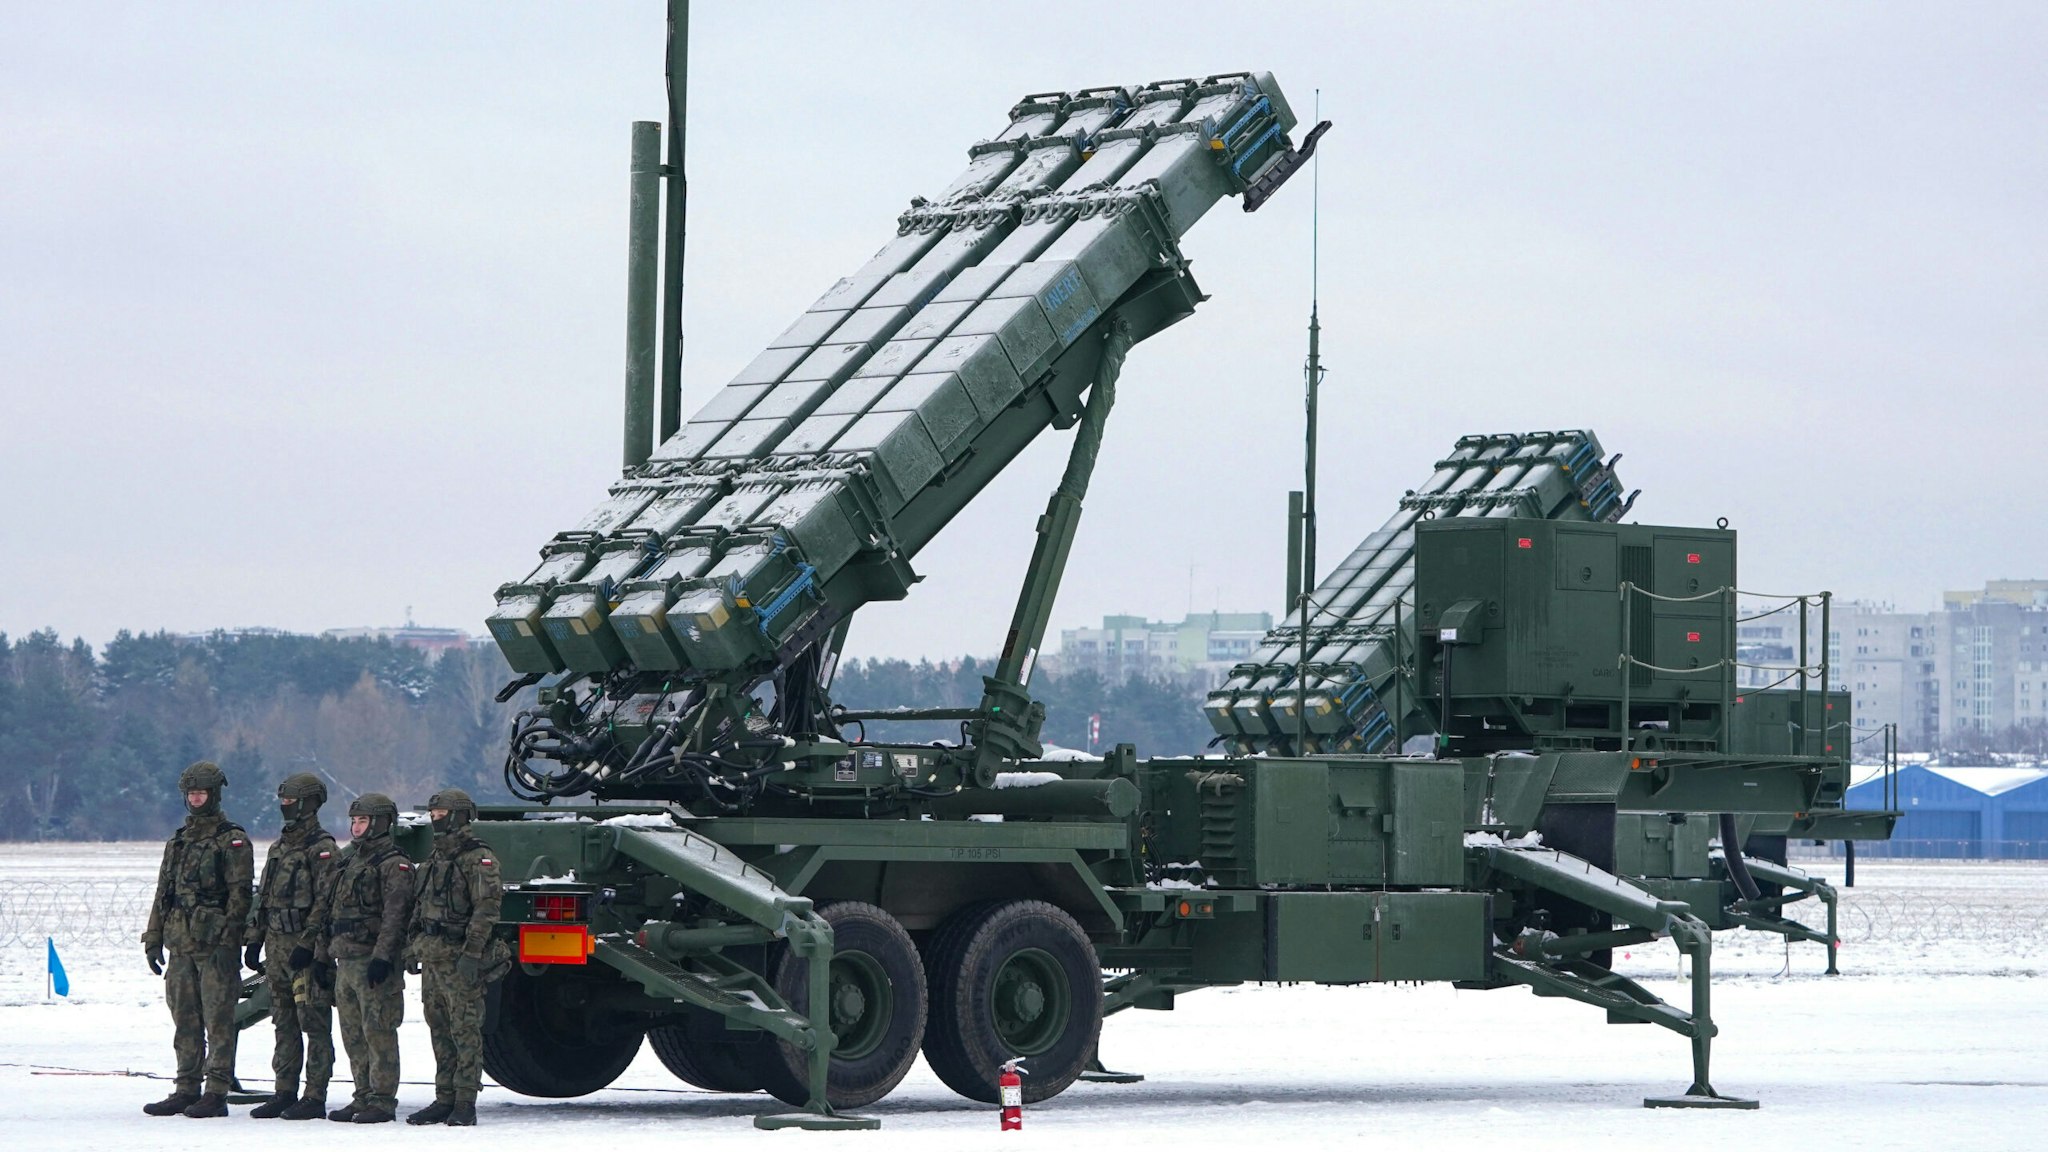 Soldiers stand in front of a PATRIOT (Phased Array Tracking Radar to Intercept on Target) surface-to-air missile system during a military exercise at Warsaw Babice Airport, Poland on February 7, 2023. - Patriot missile systems purchased by Poland last year have been redeployed to the Polish captital for military exercises.